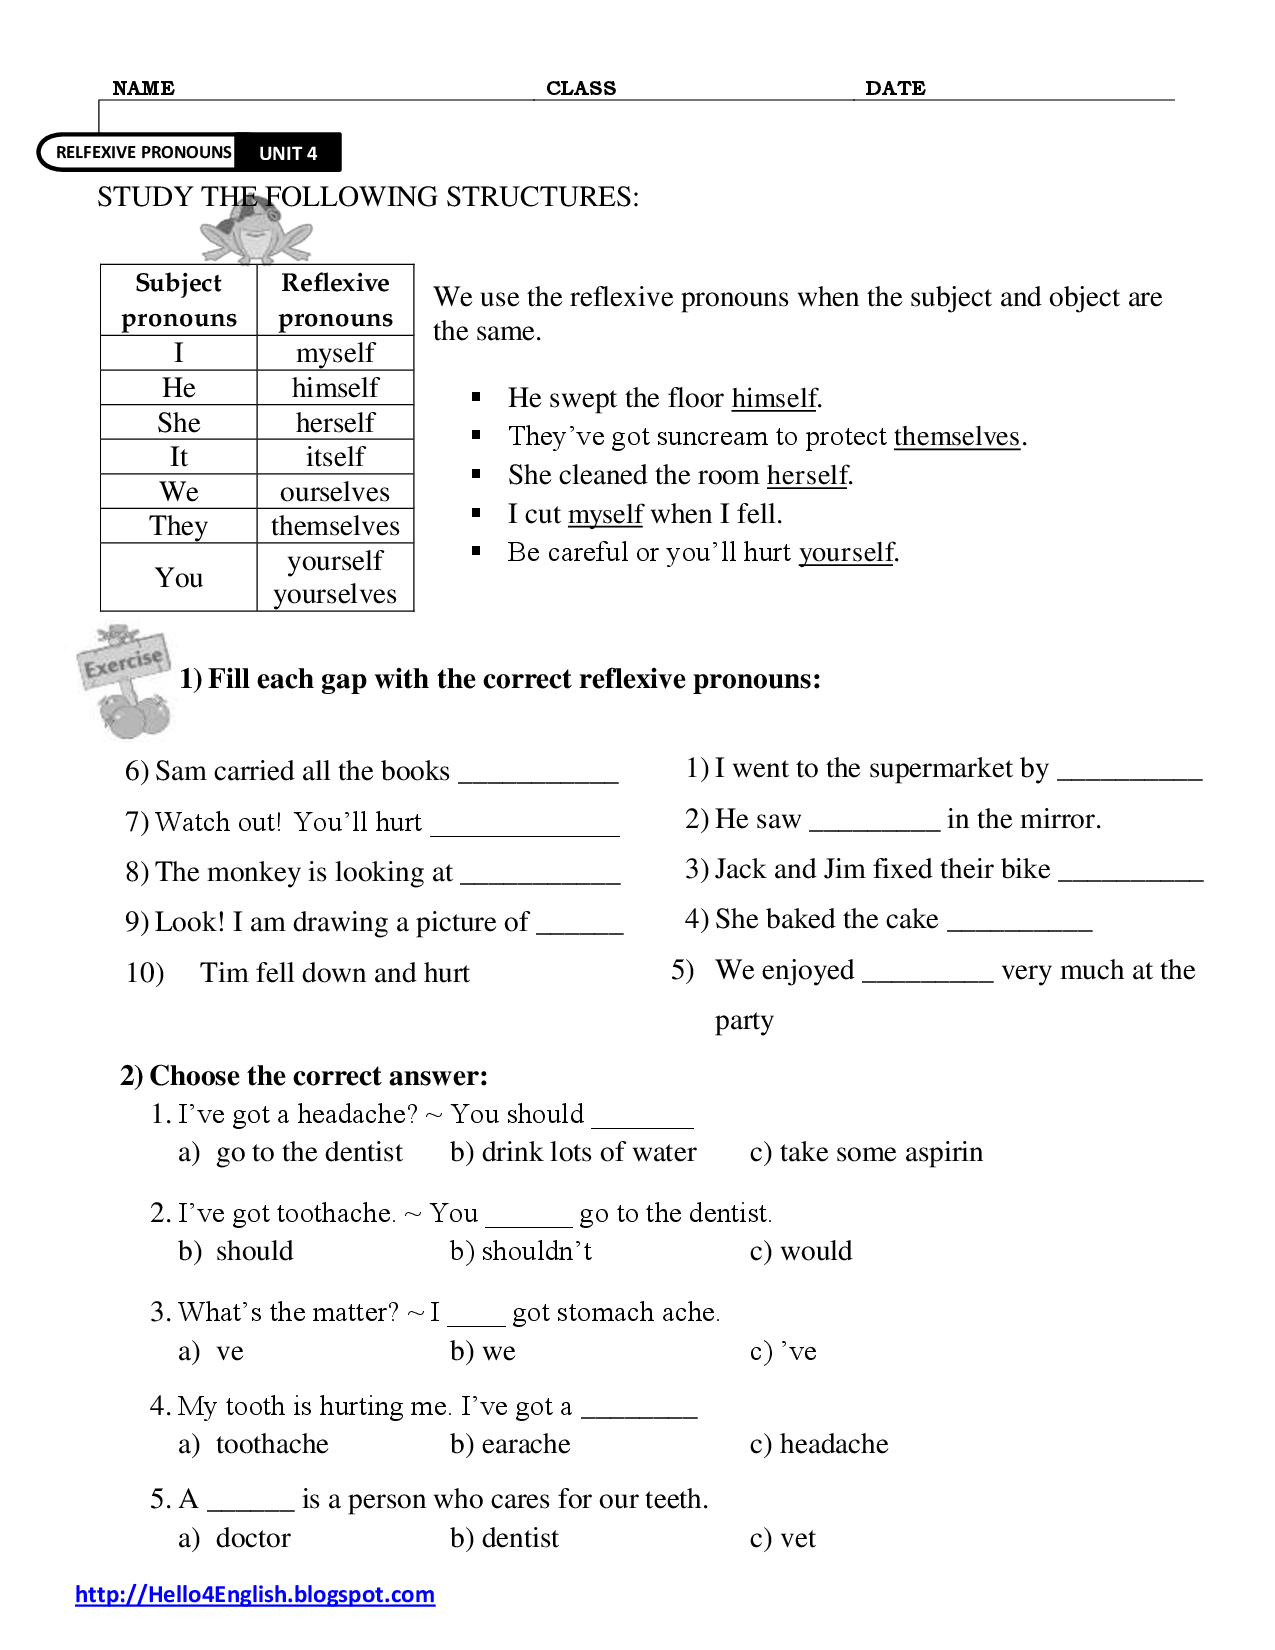 16 Best Images of Reflexive Pronouns In Spanish Worksheet - Spanish